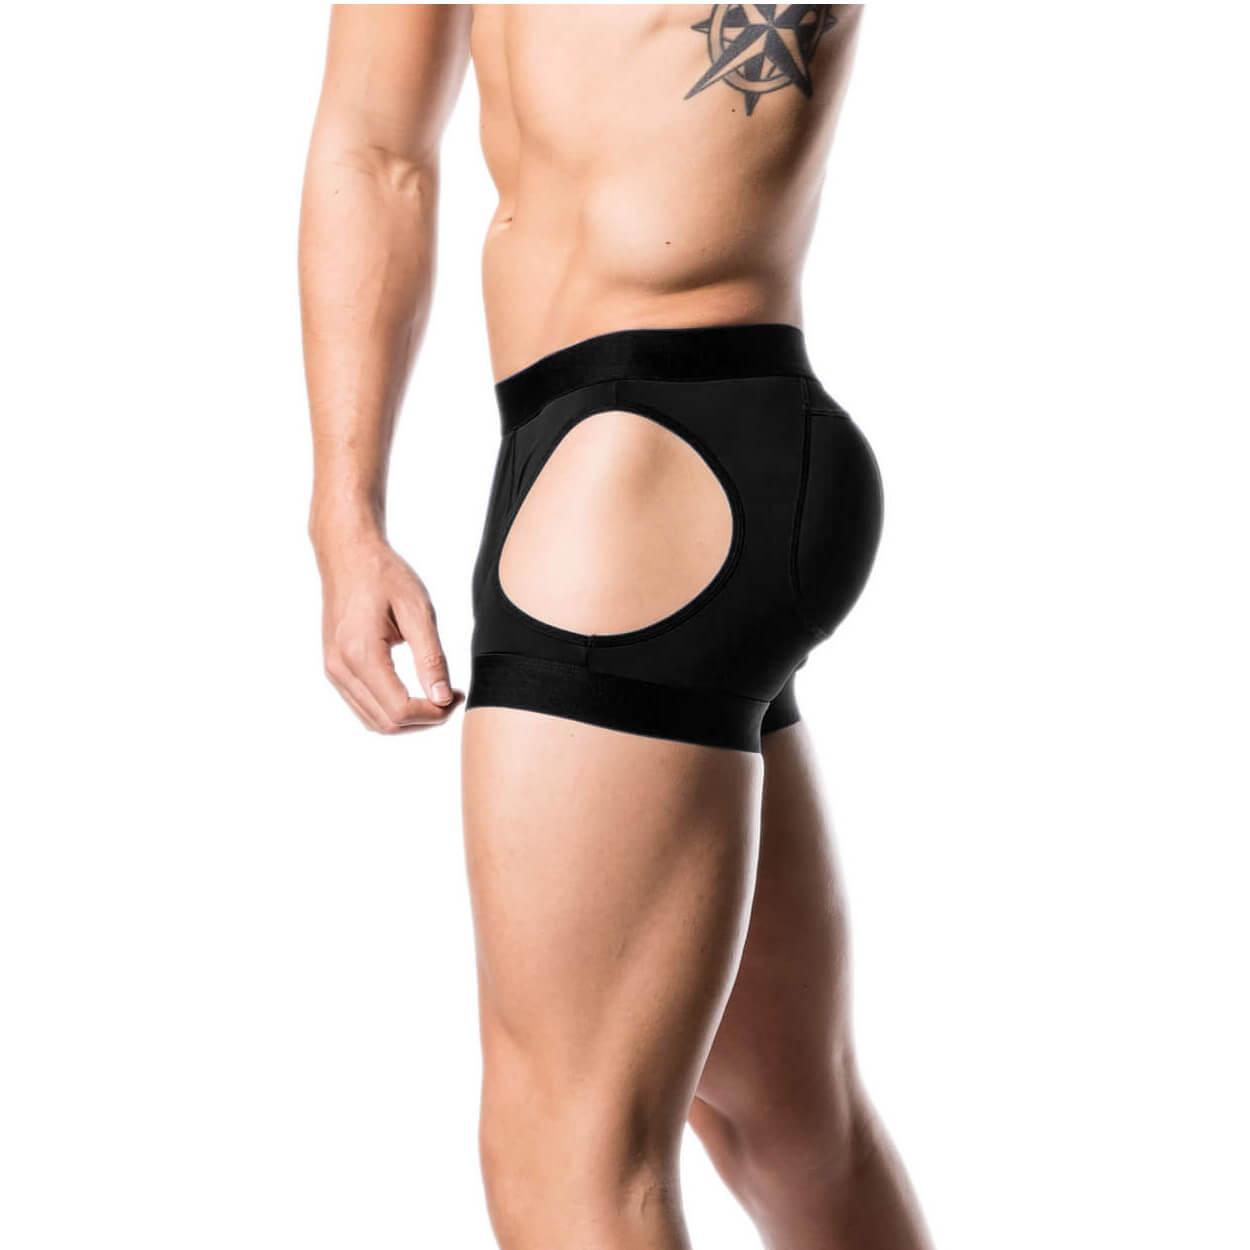 Butt-Enhancing Underwear For Guys Actually Exists - And It's